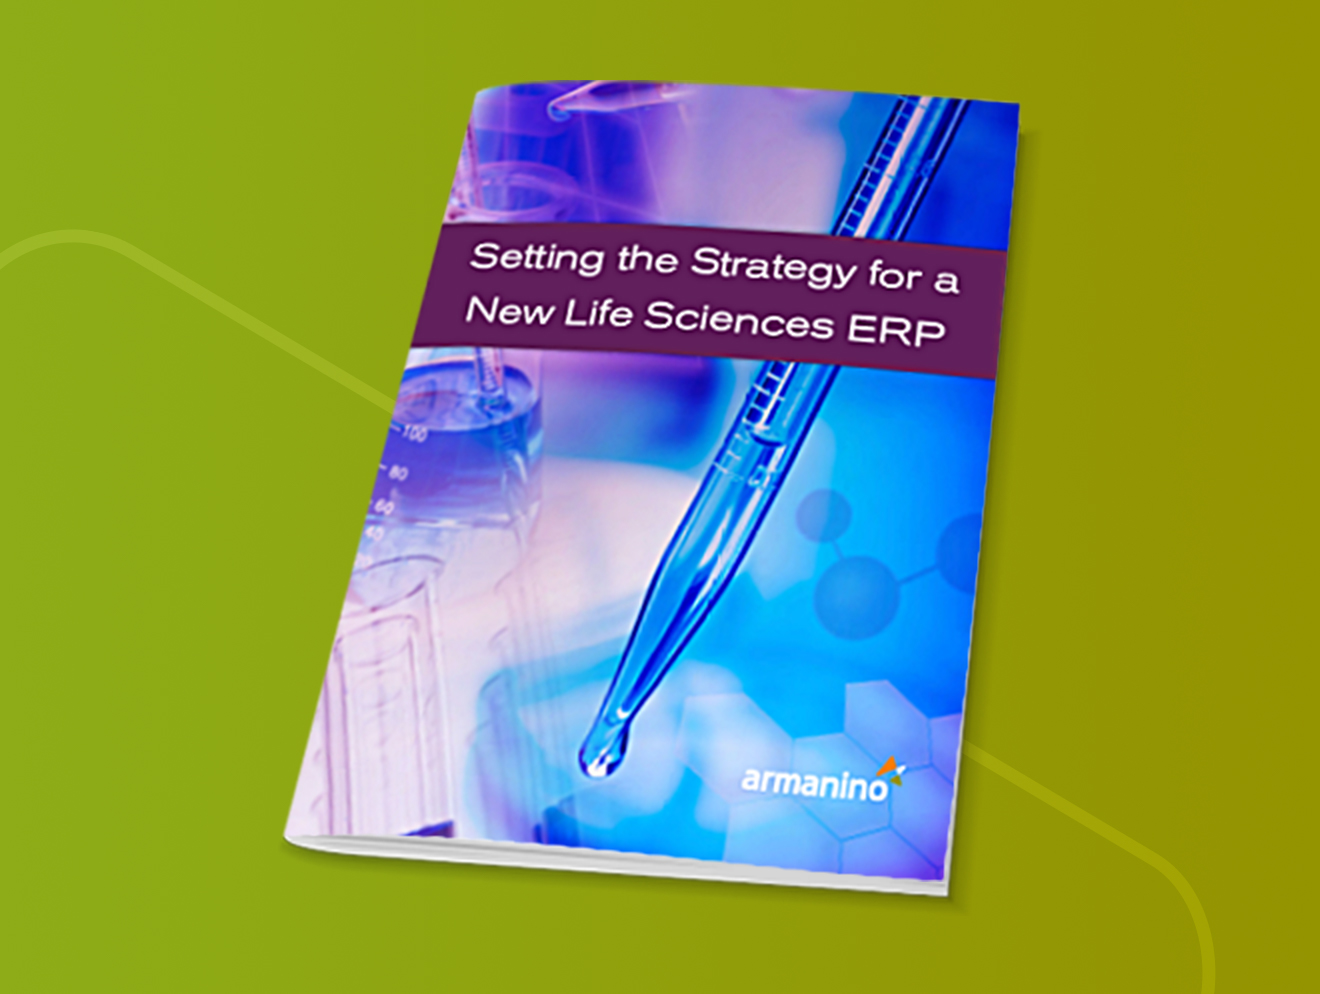 Setting the Strategy for a New Life Sciences ERP